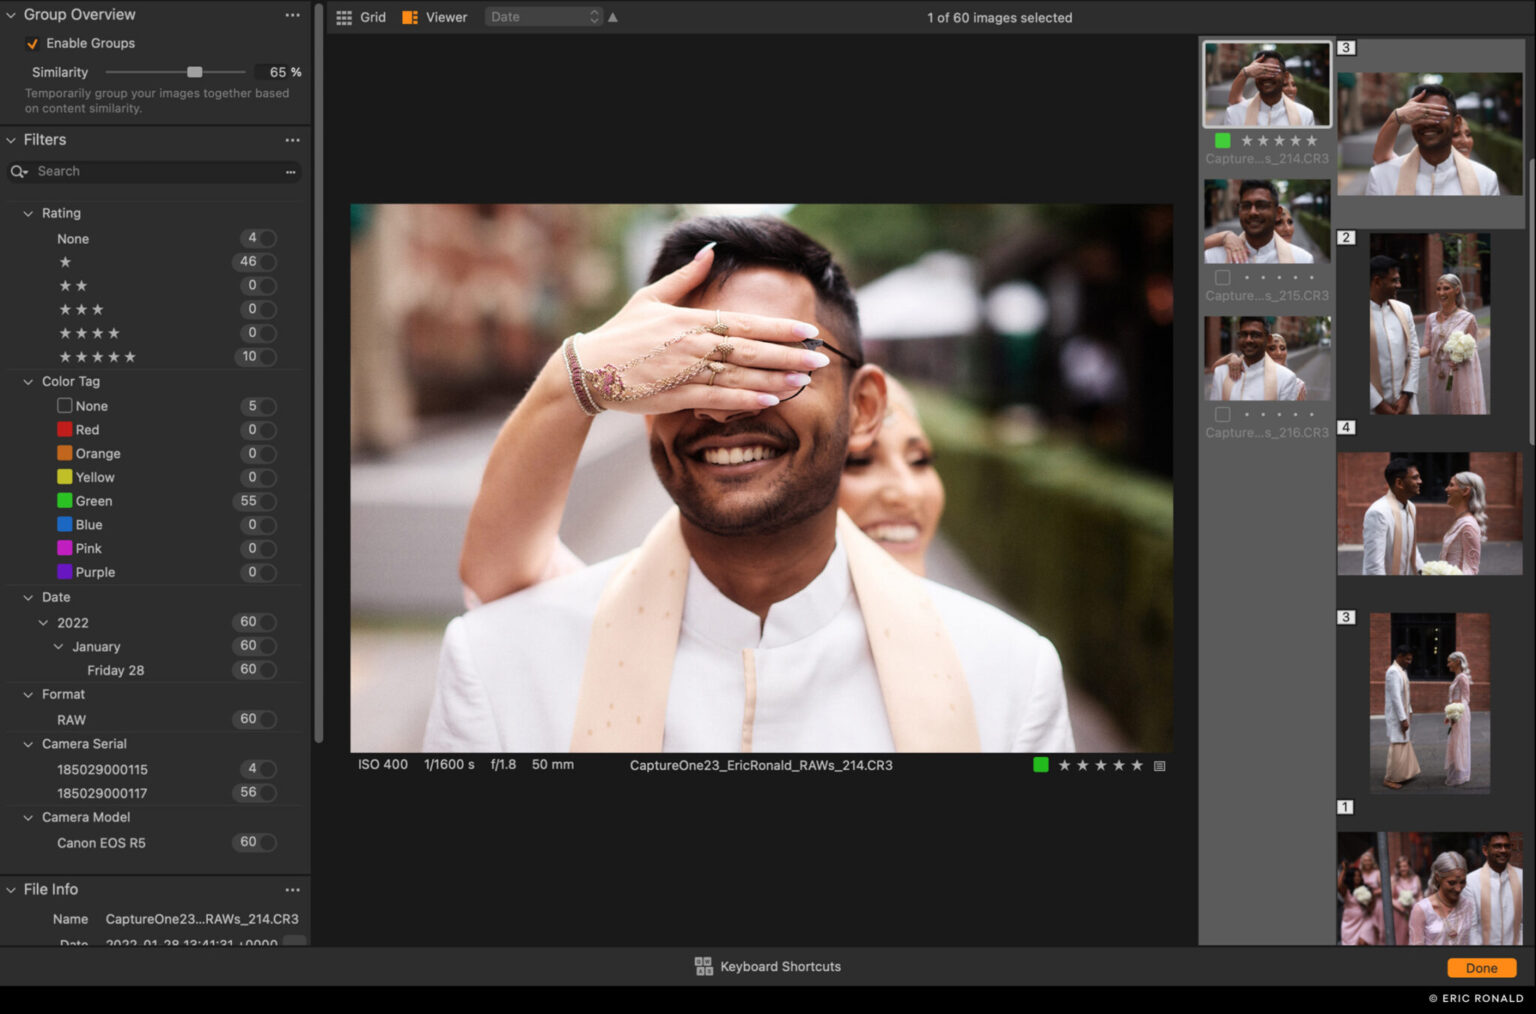 Capture One 23 Pro 16.2.3.1471 downloading